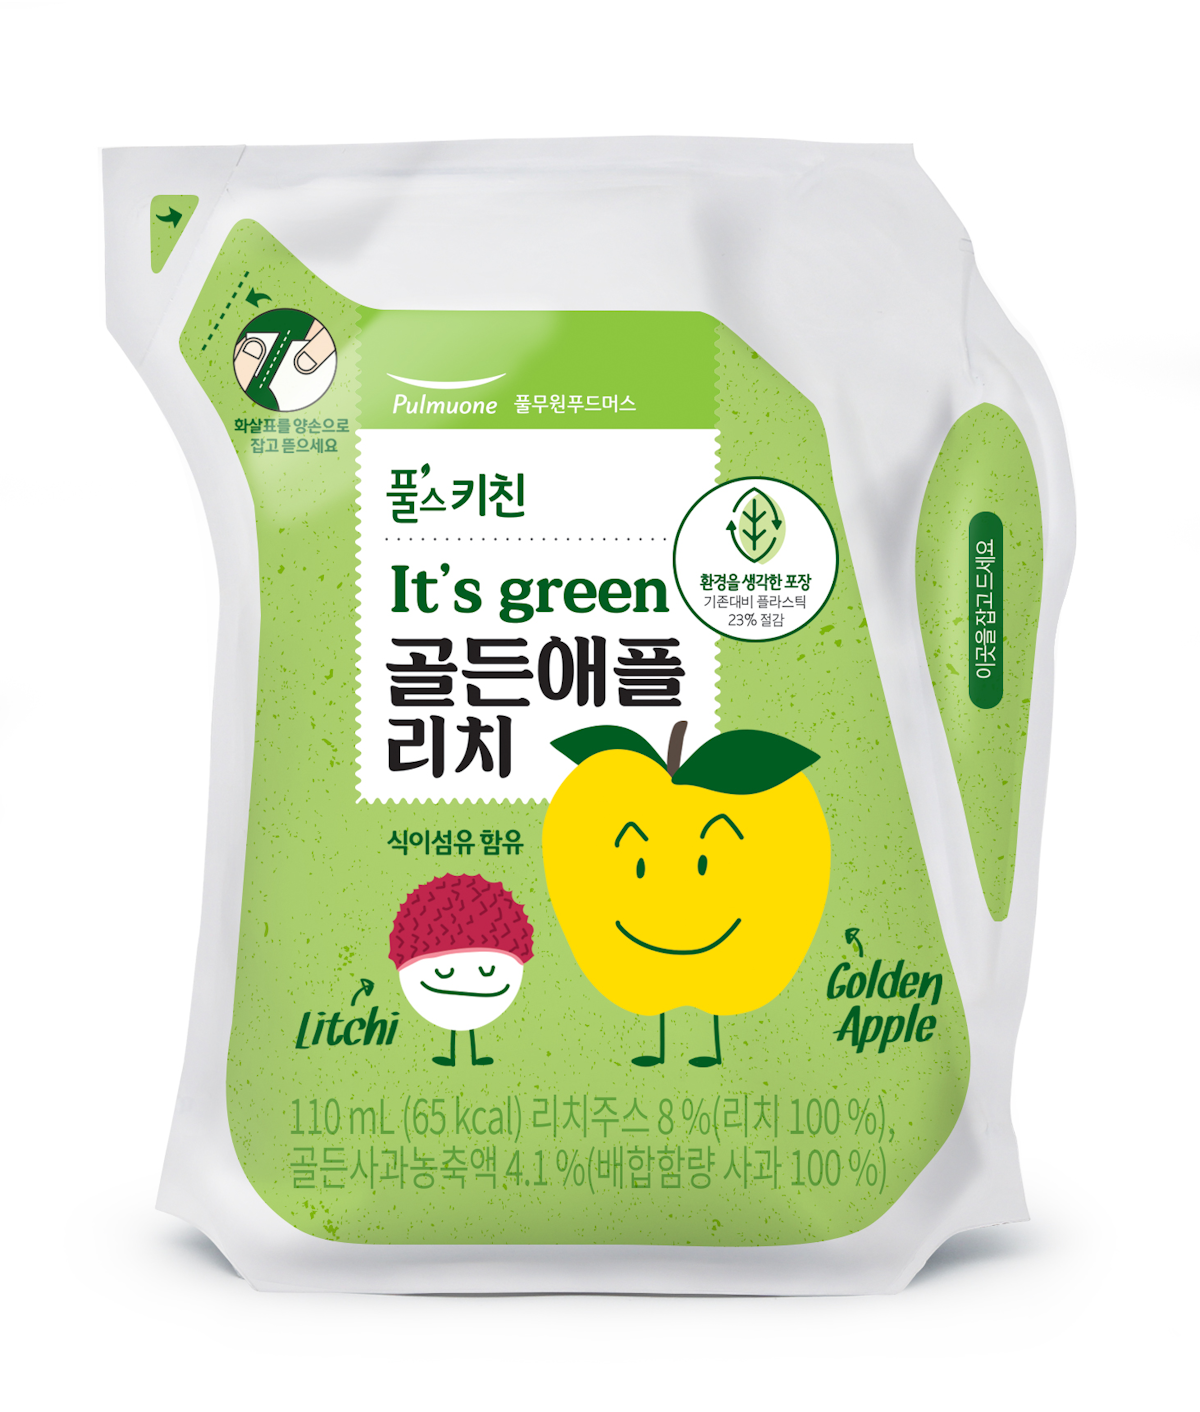 Download South Korean Processor Embraces Sustainable Packaging | Packaging World